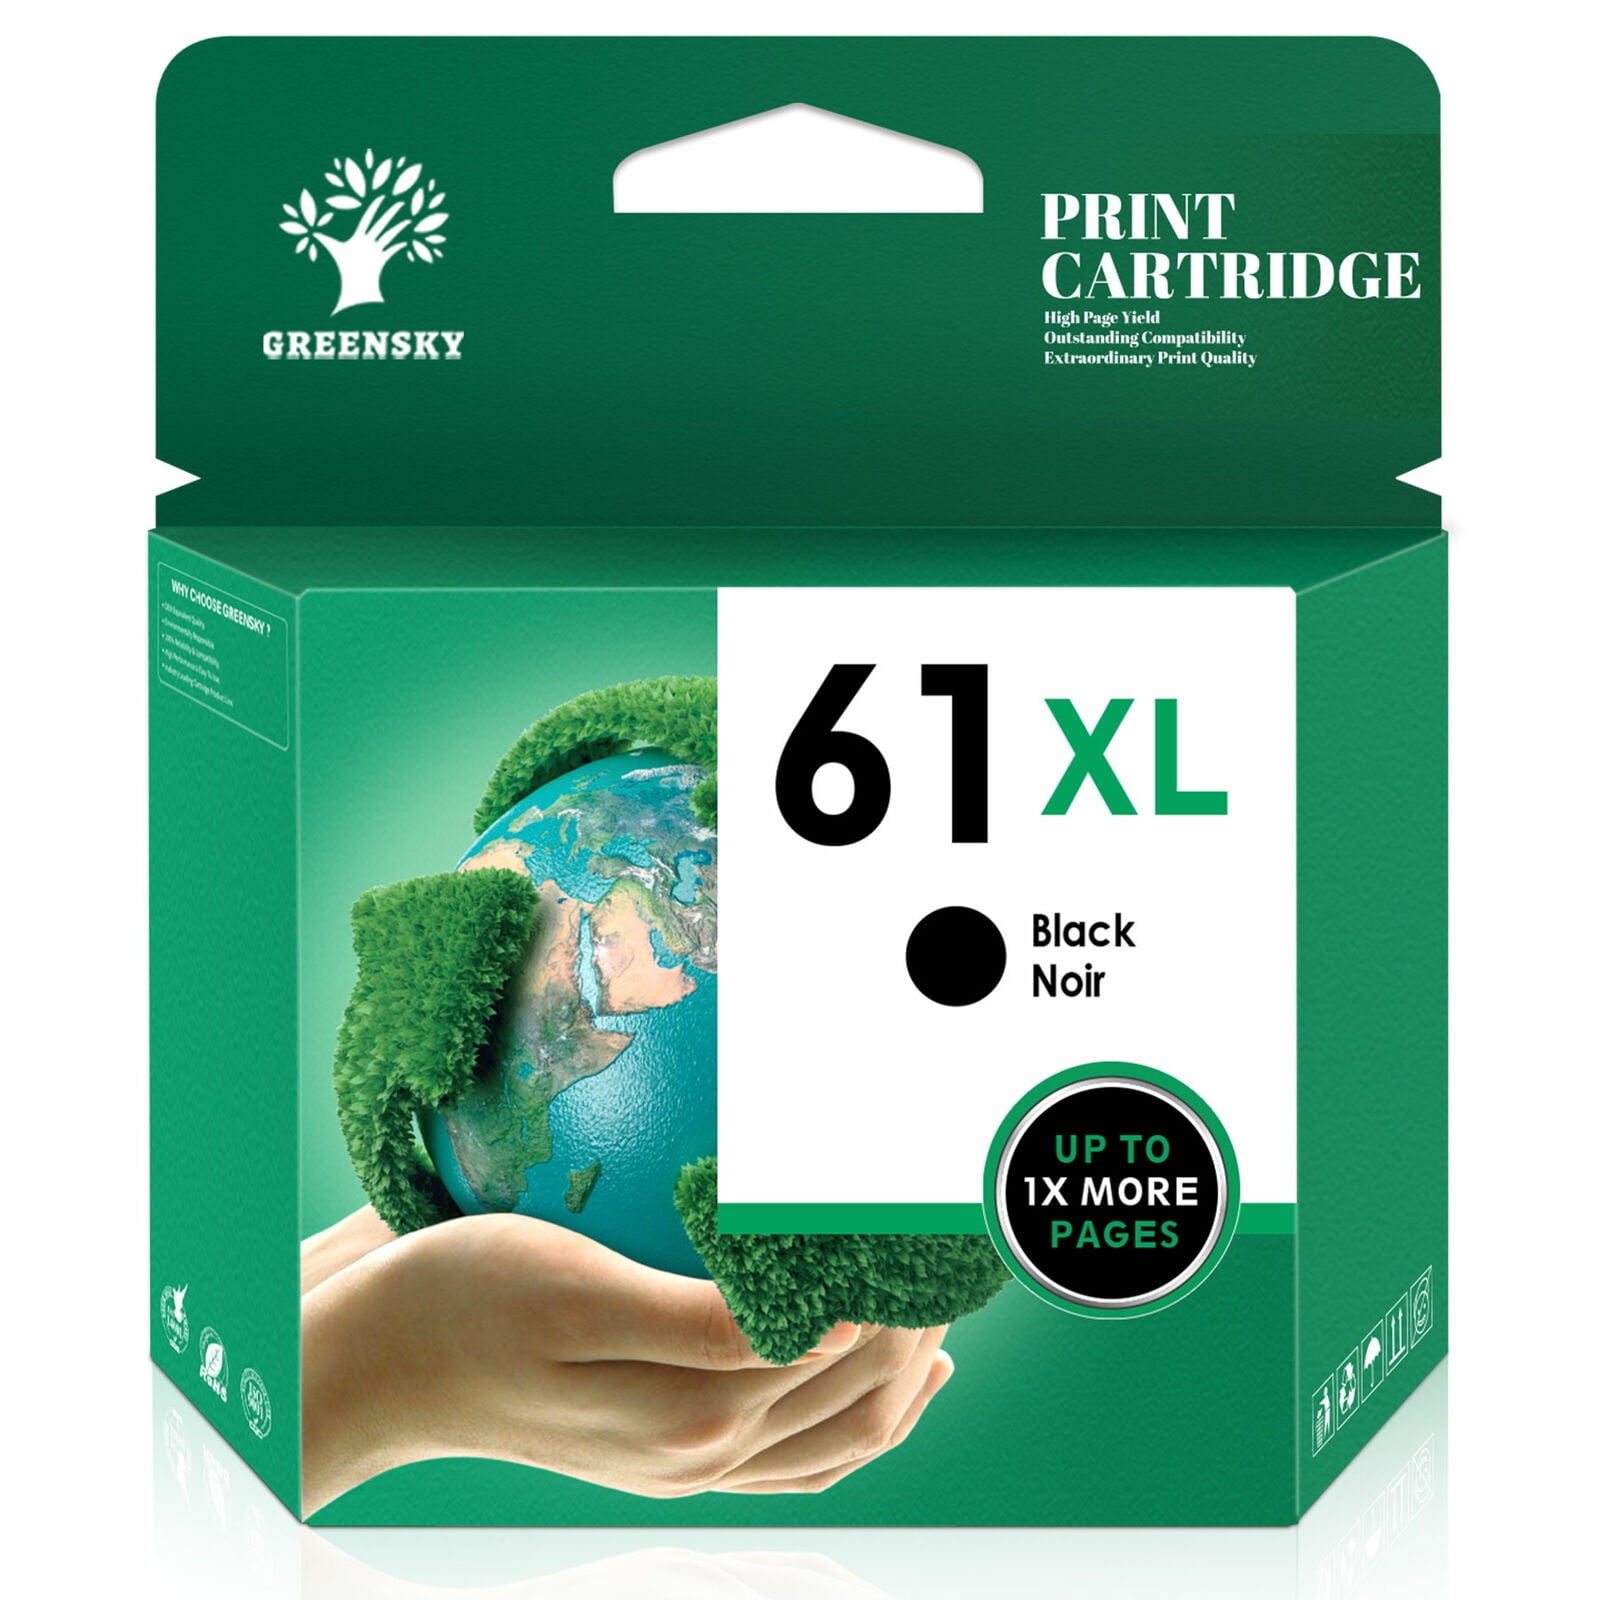 Greensky 61 XL Ink Cartridge Black Replacement for Printer (1 Pack)